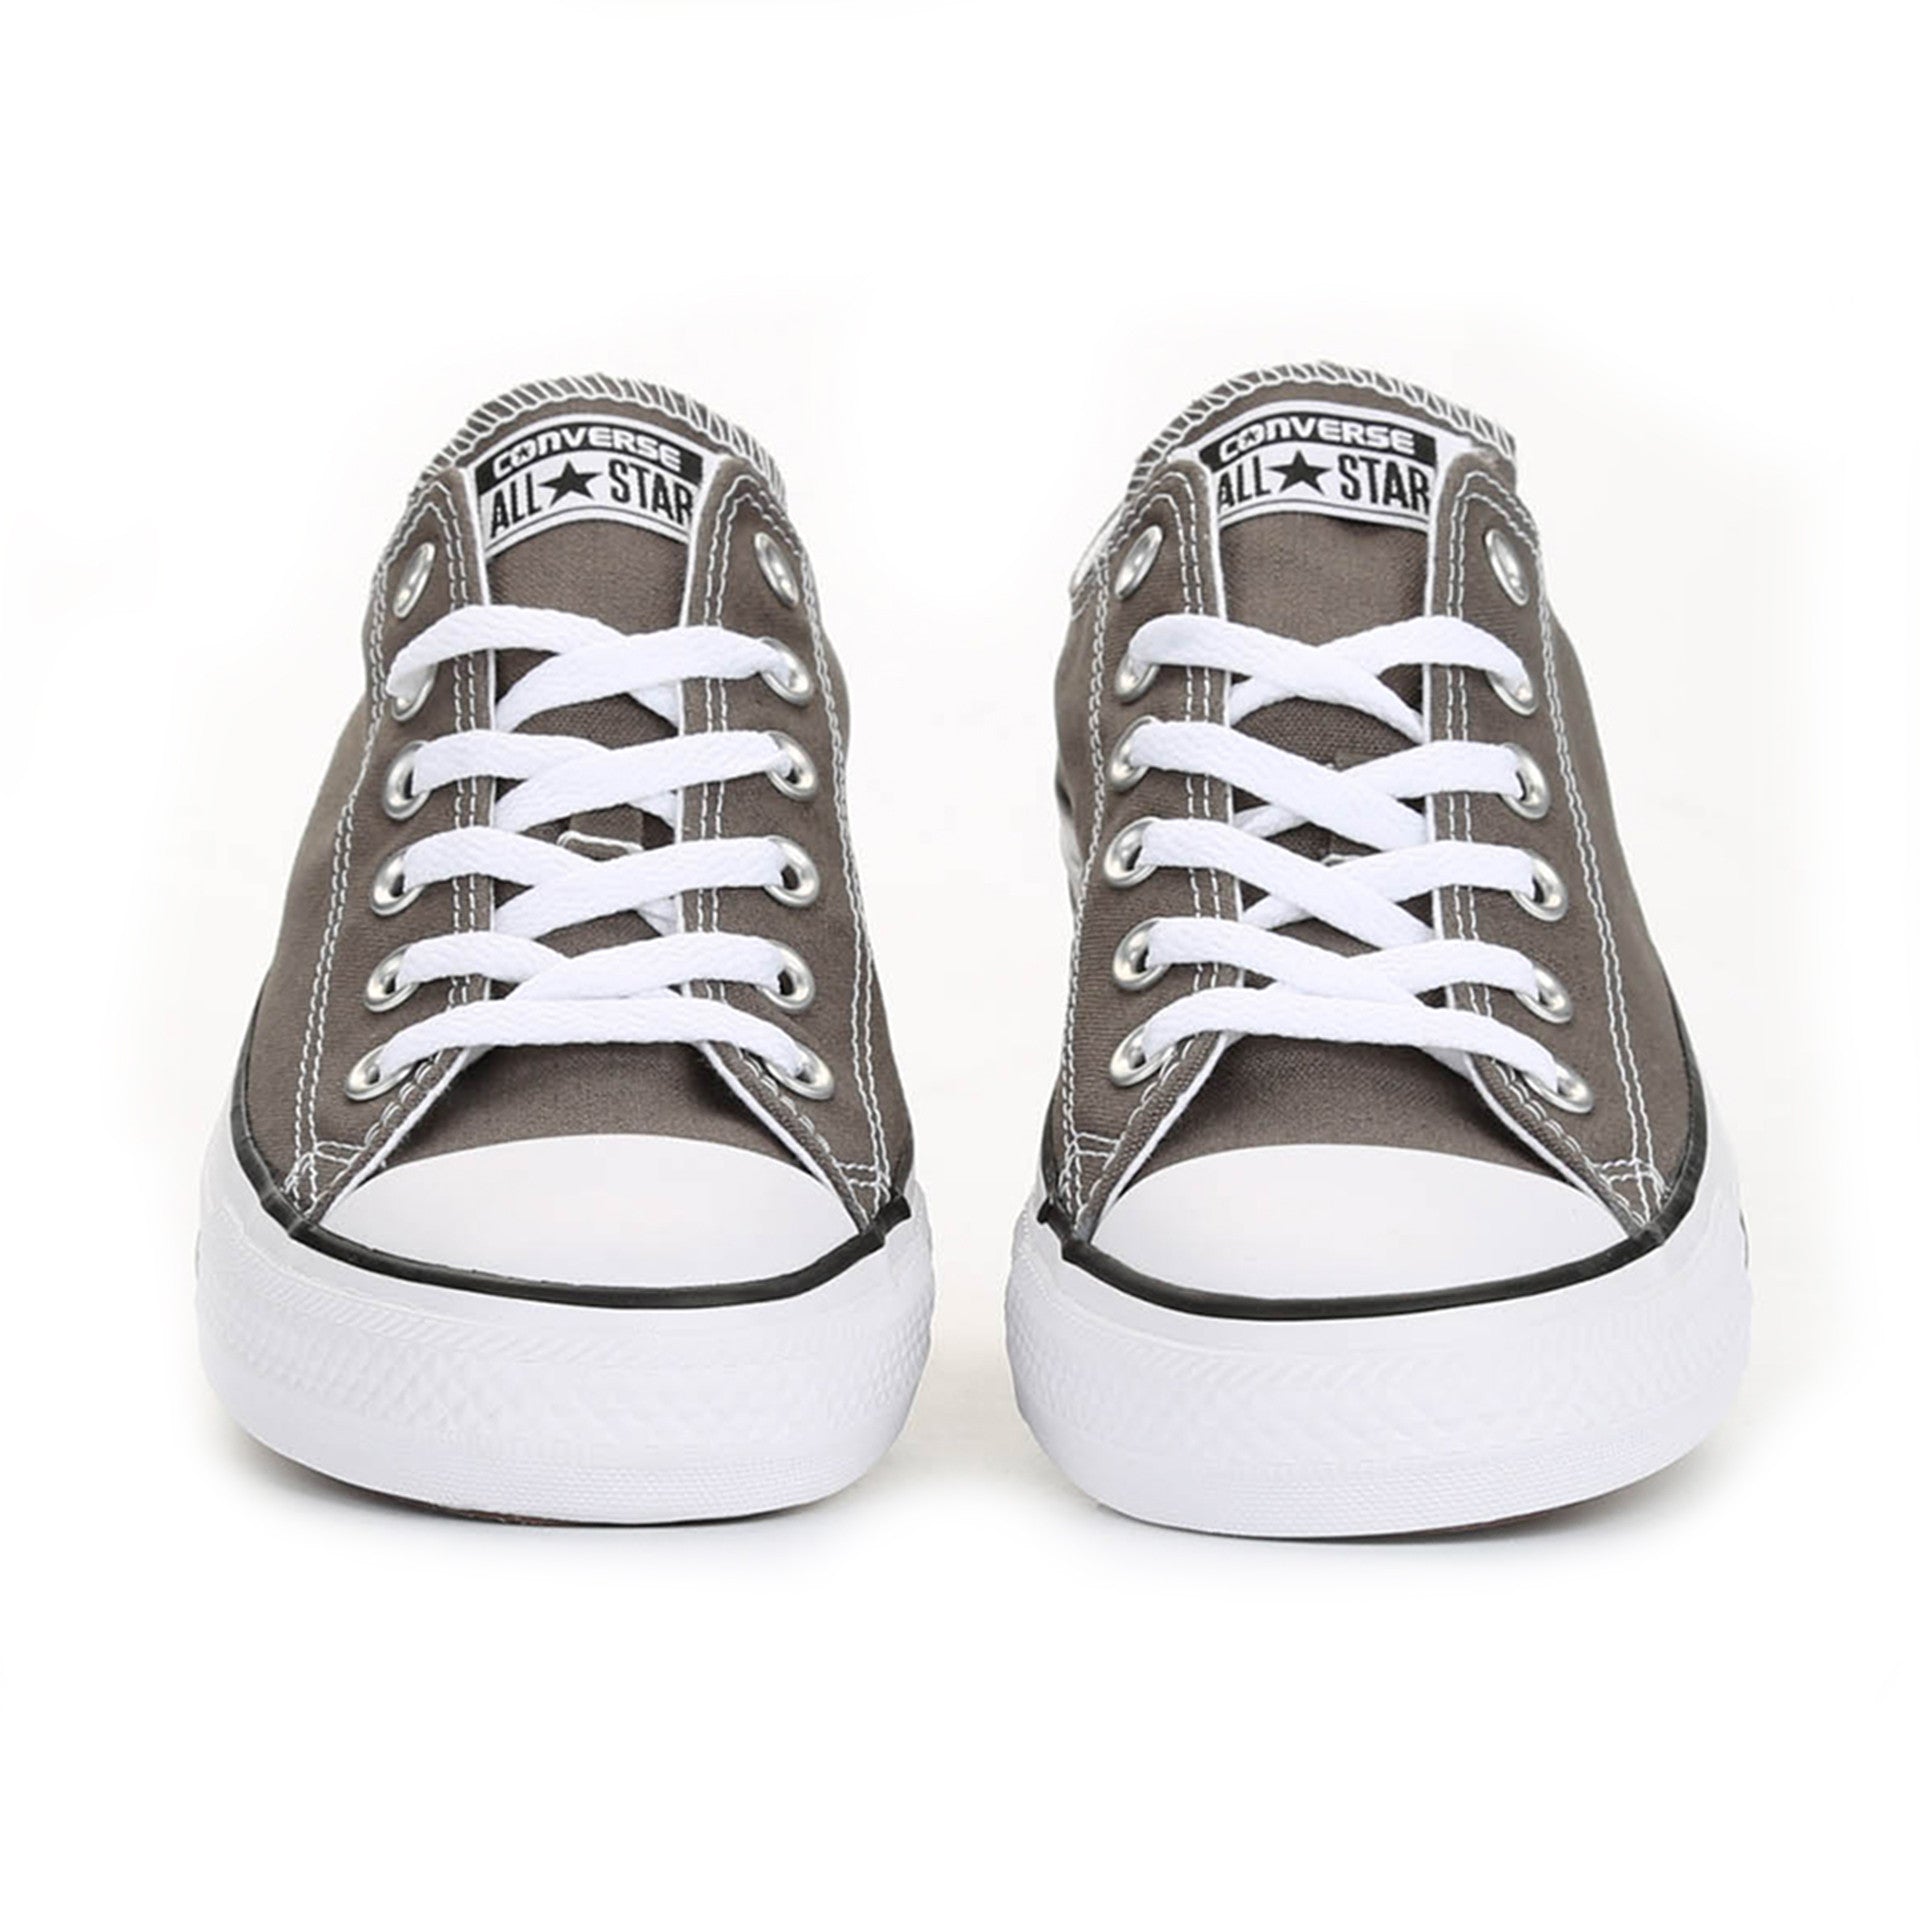 Converse Chuck Taylor Low Top - Charcoal - New Star